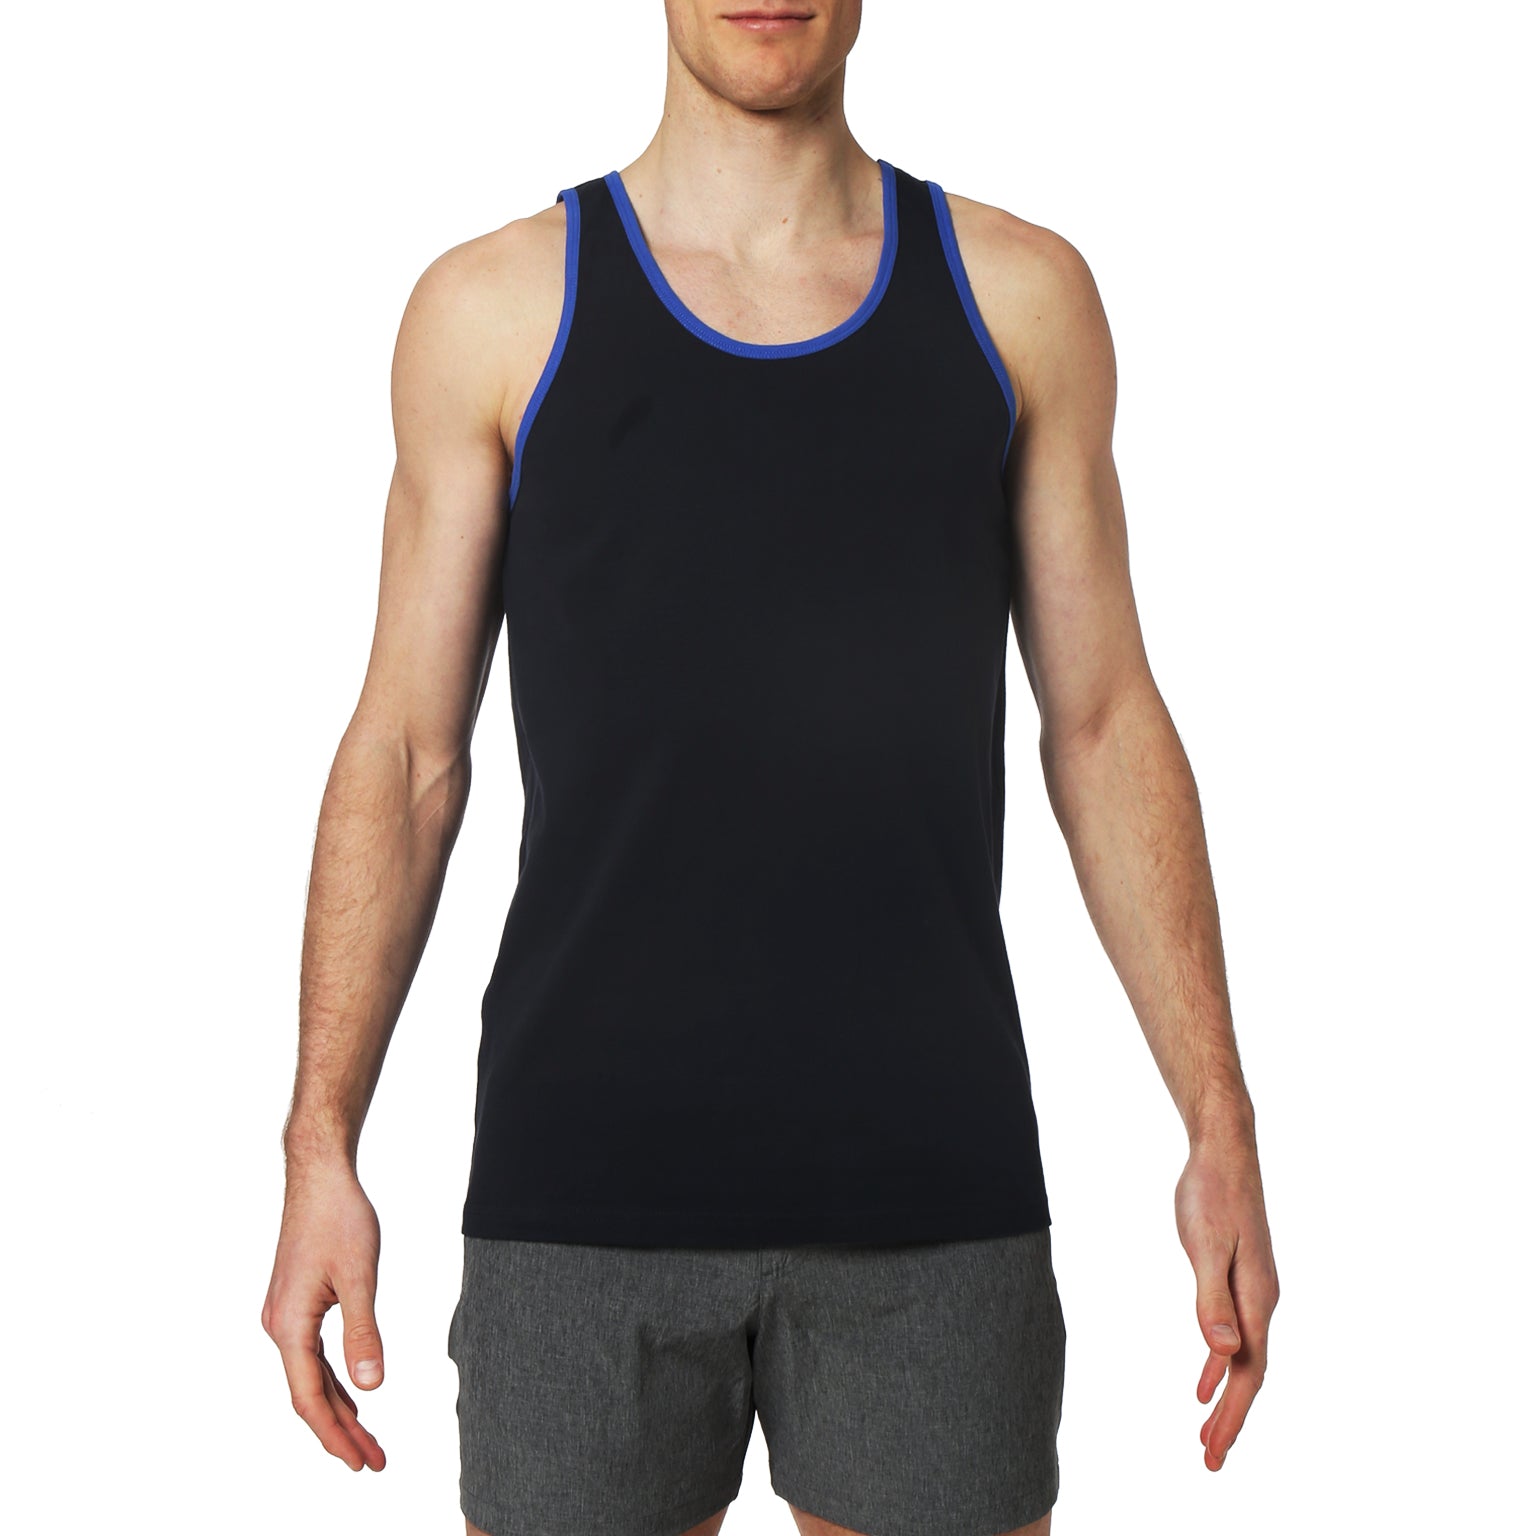 ACTIONWEAR- Navy/Royal Combo Essential Cotton Tank Top